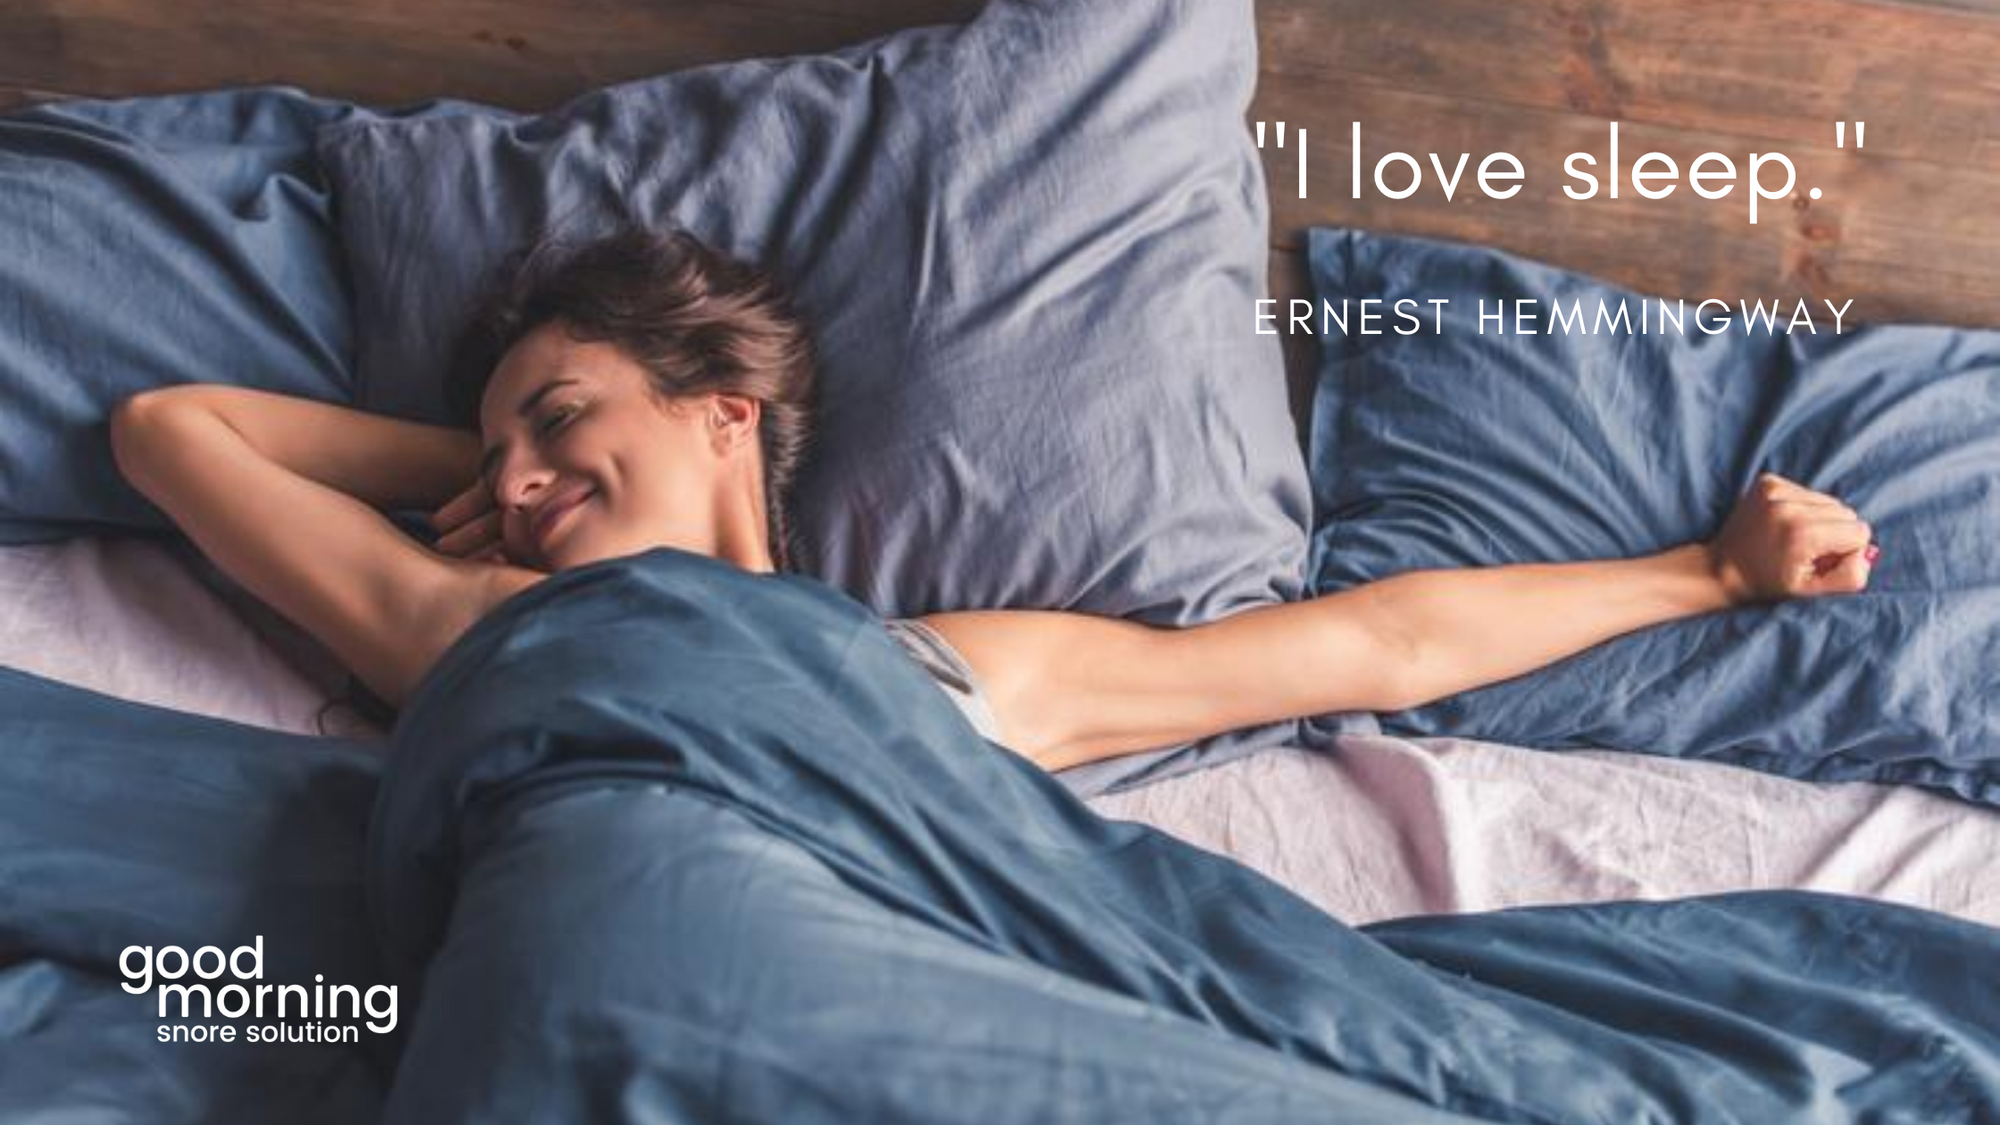 15 sleep quotes that will make you want to go to bed